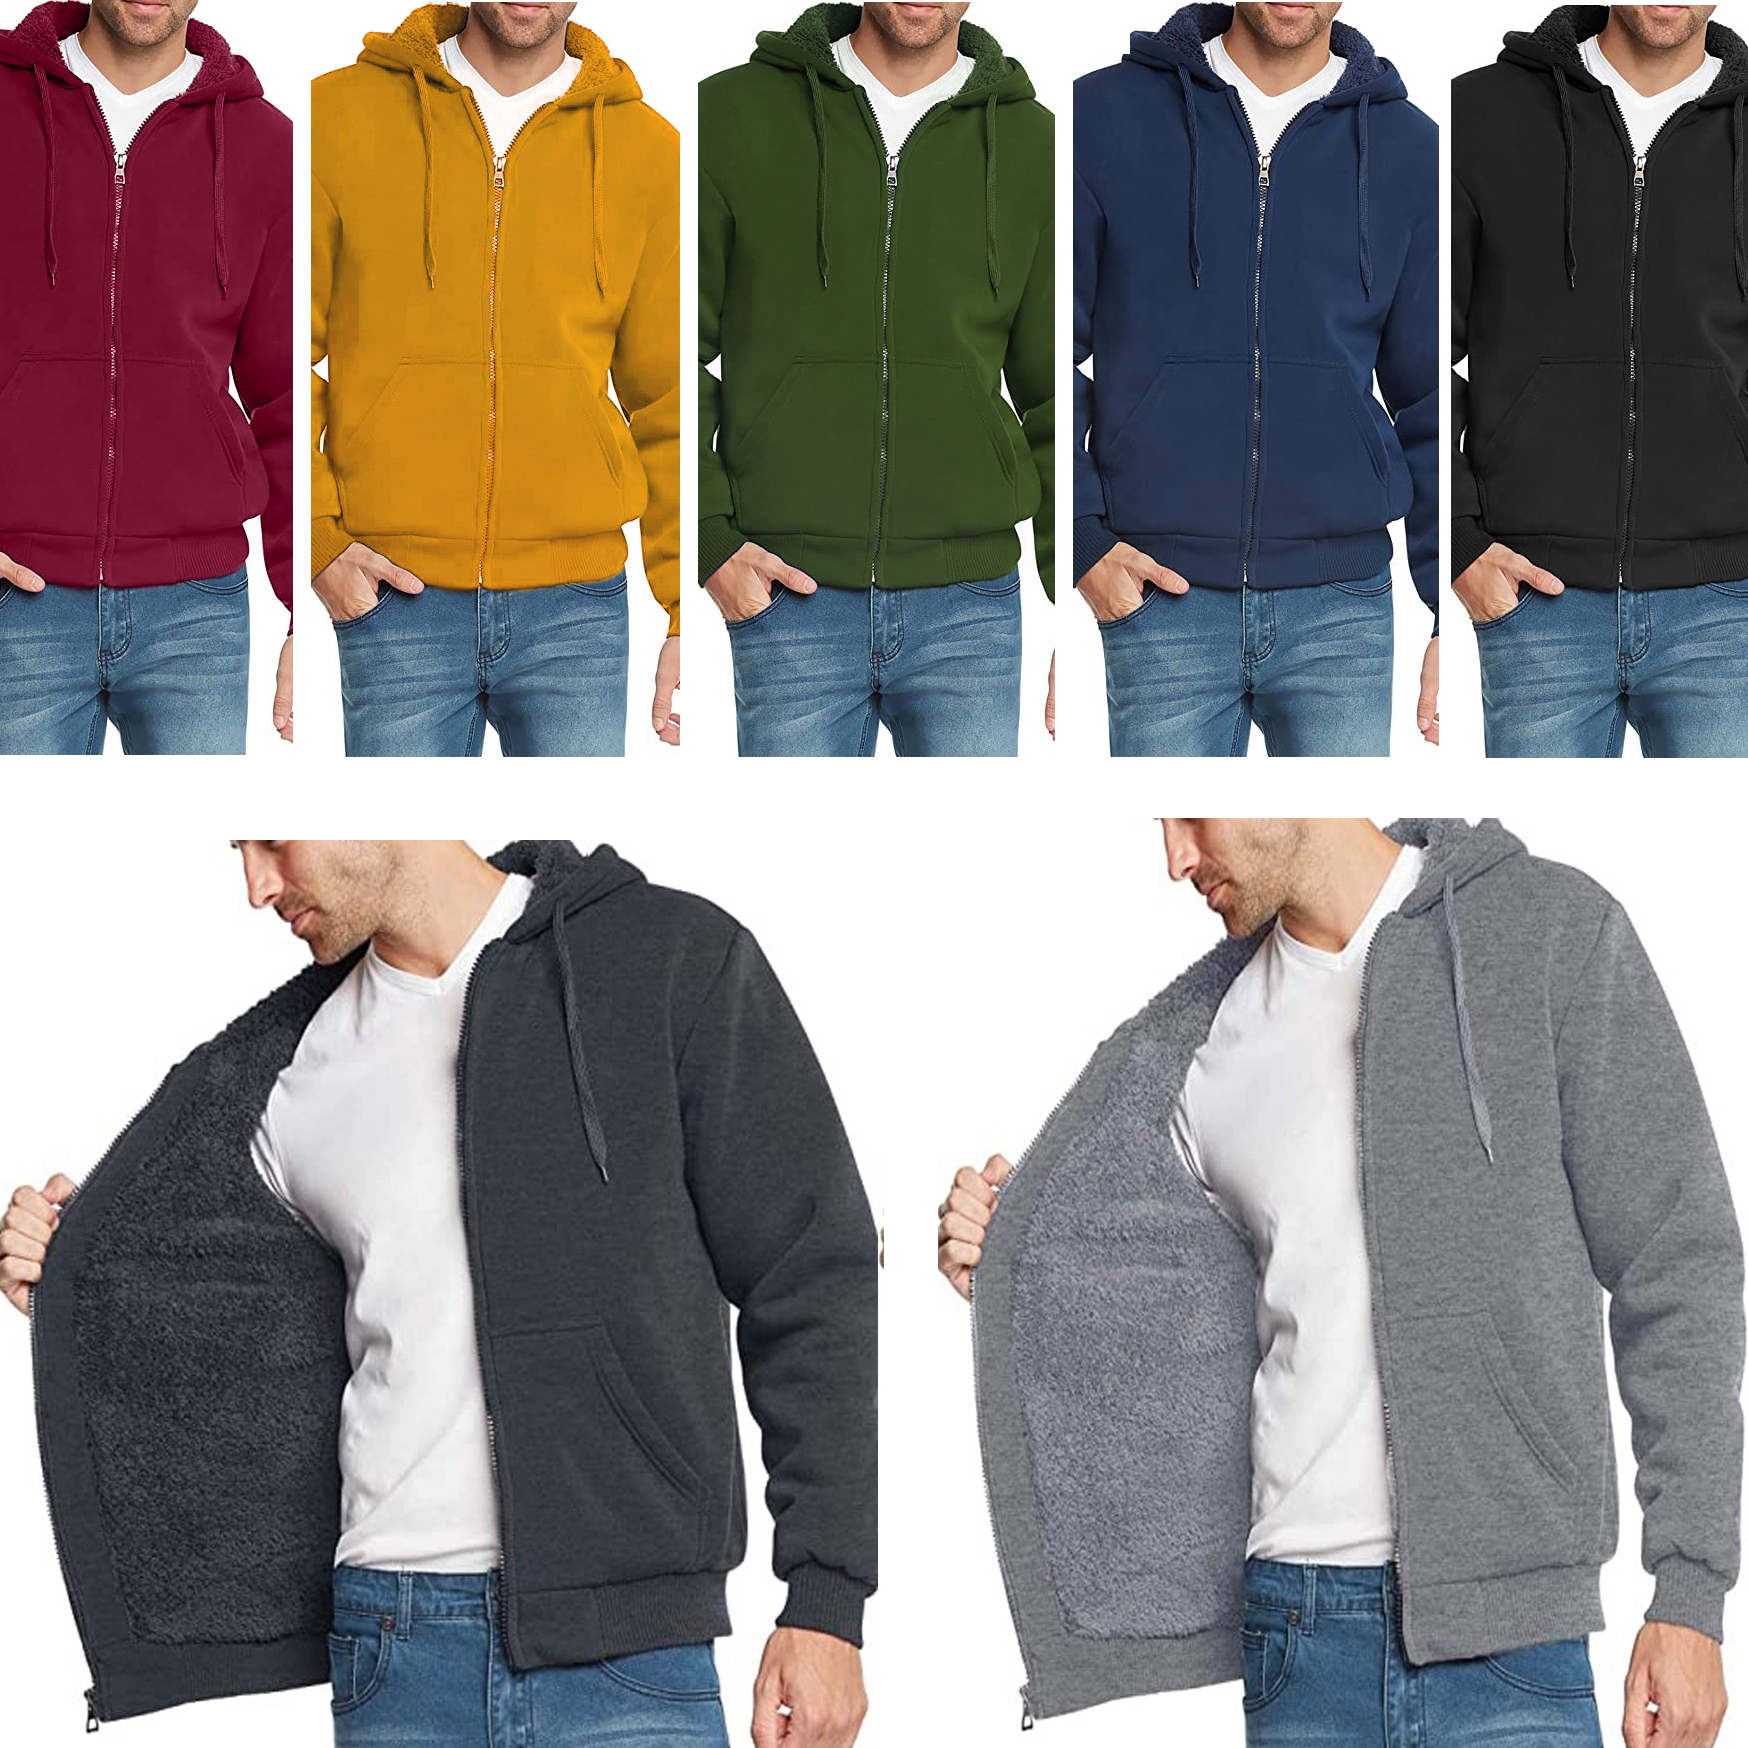 Men's Extra-Thick Sherpa Lined Fleece Hoodie (Big & Tall Sizes Available) - Navy, Medium